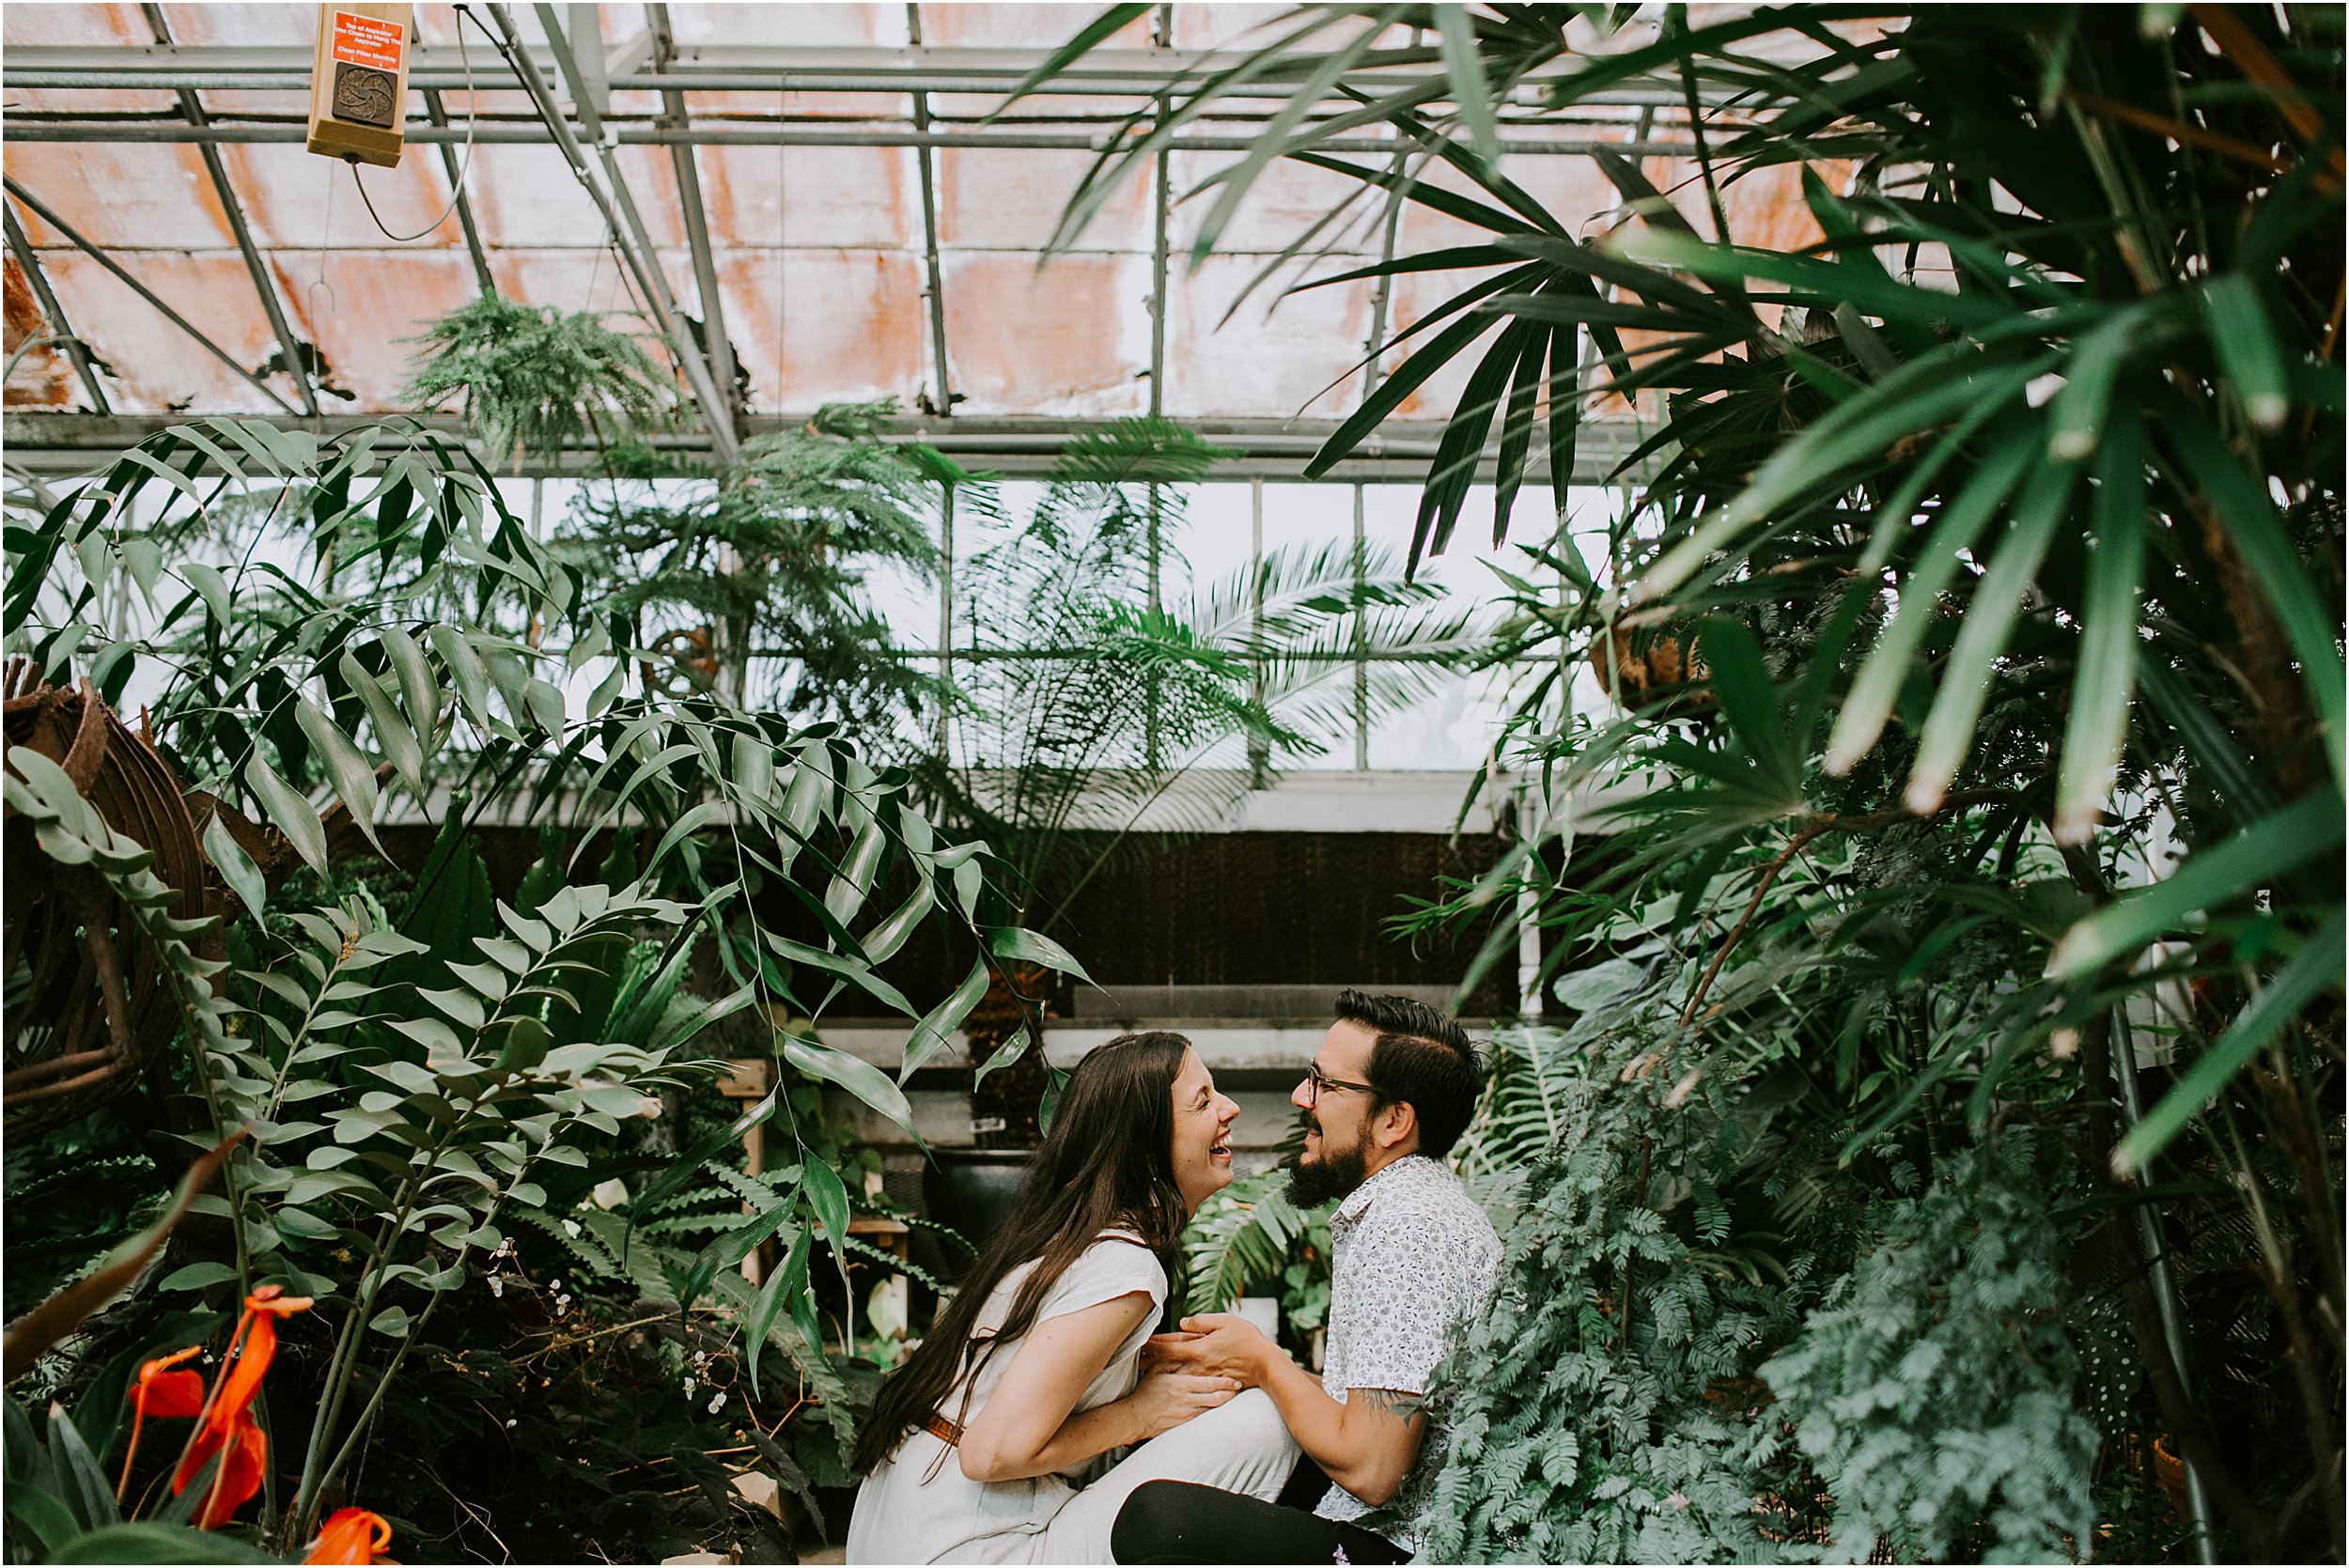  A couple is sitting on the ground in a greenhouse, facing each other. They are holding hands and the girl is laughing. There are tall green plants and a red flower. 